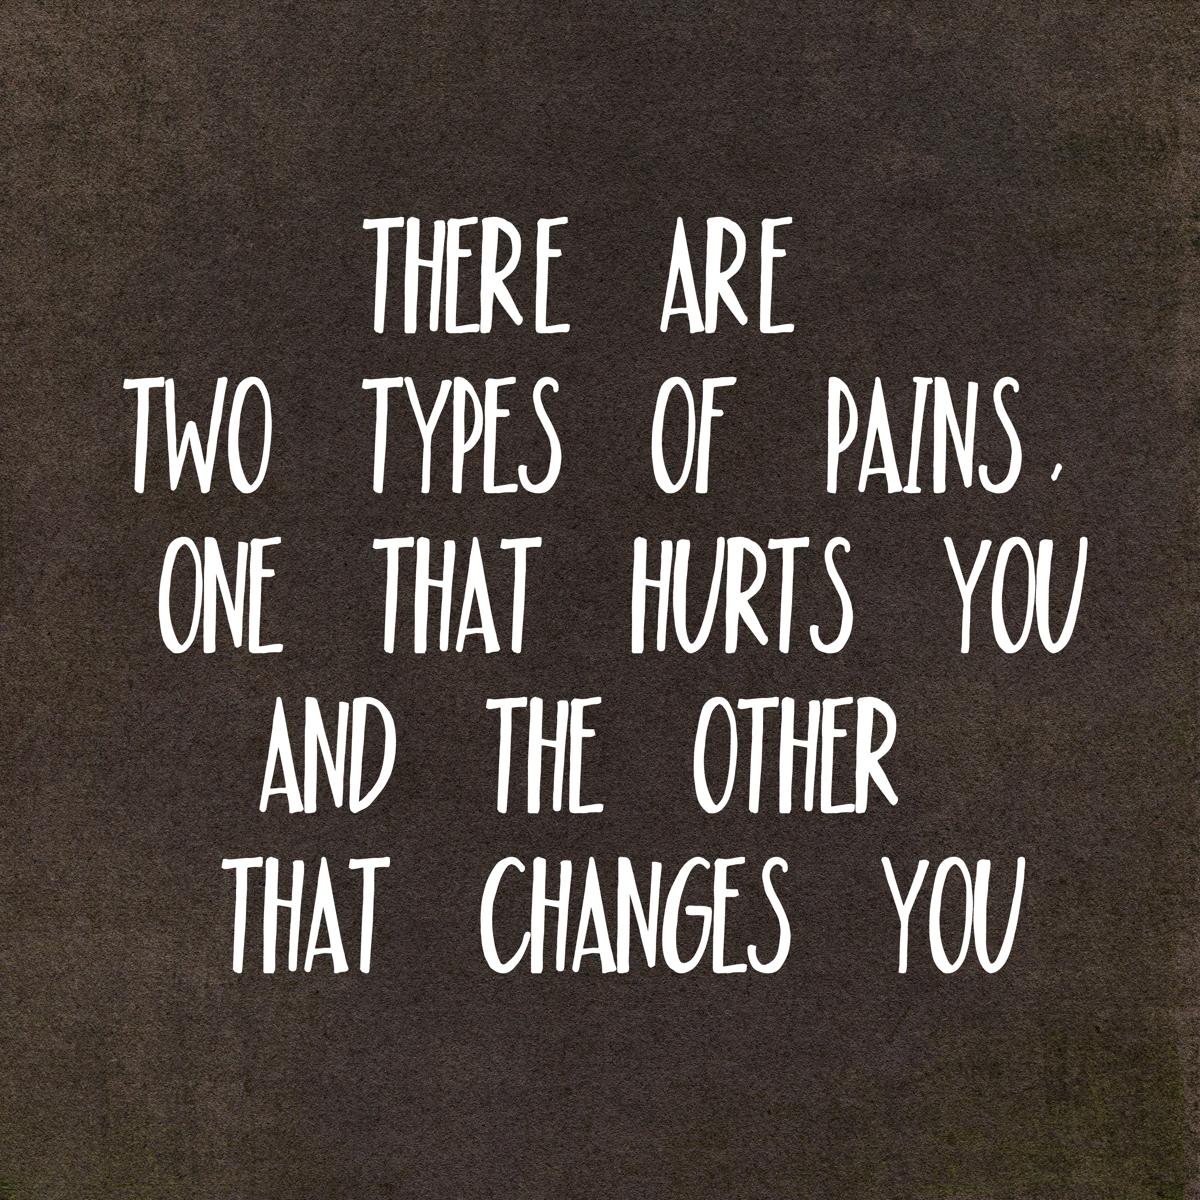 There are two types of pains. One that hurts you and the other that changes you